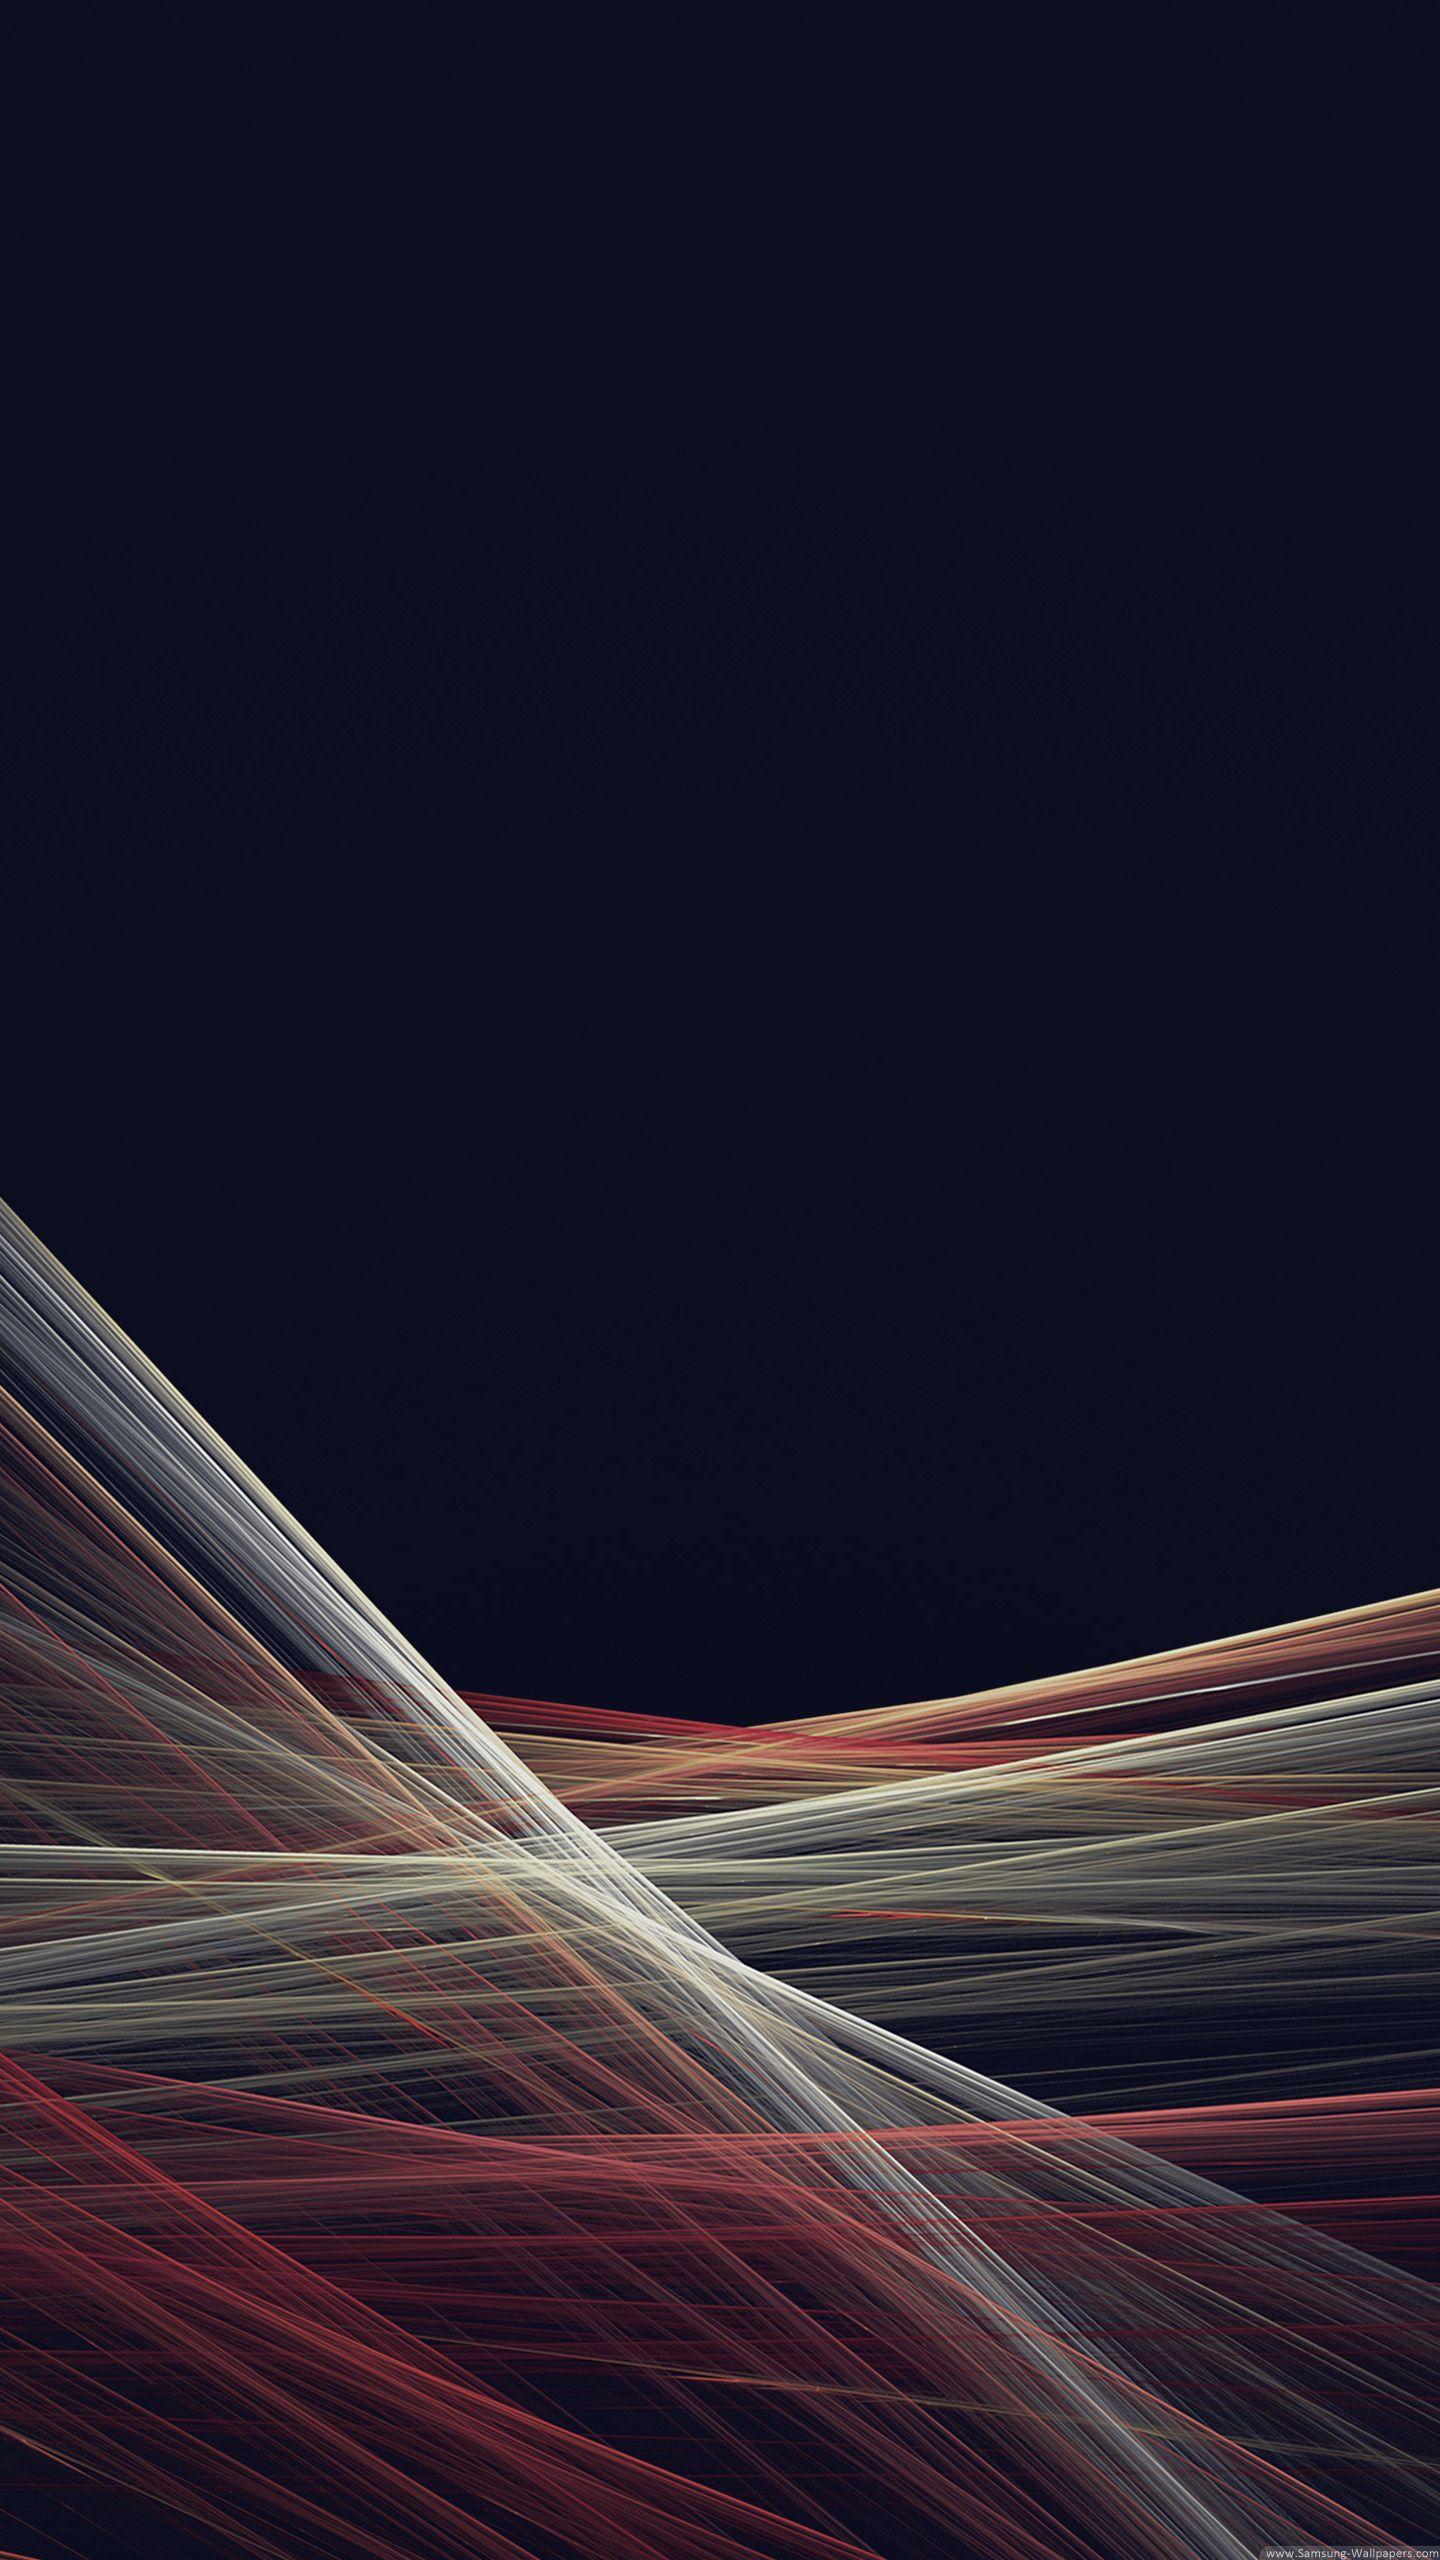 Abstract LG G Official Wallpapers for Samsung Galaxy S